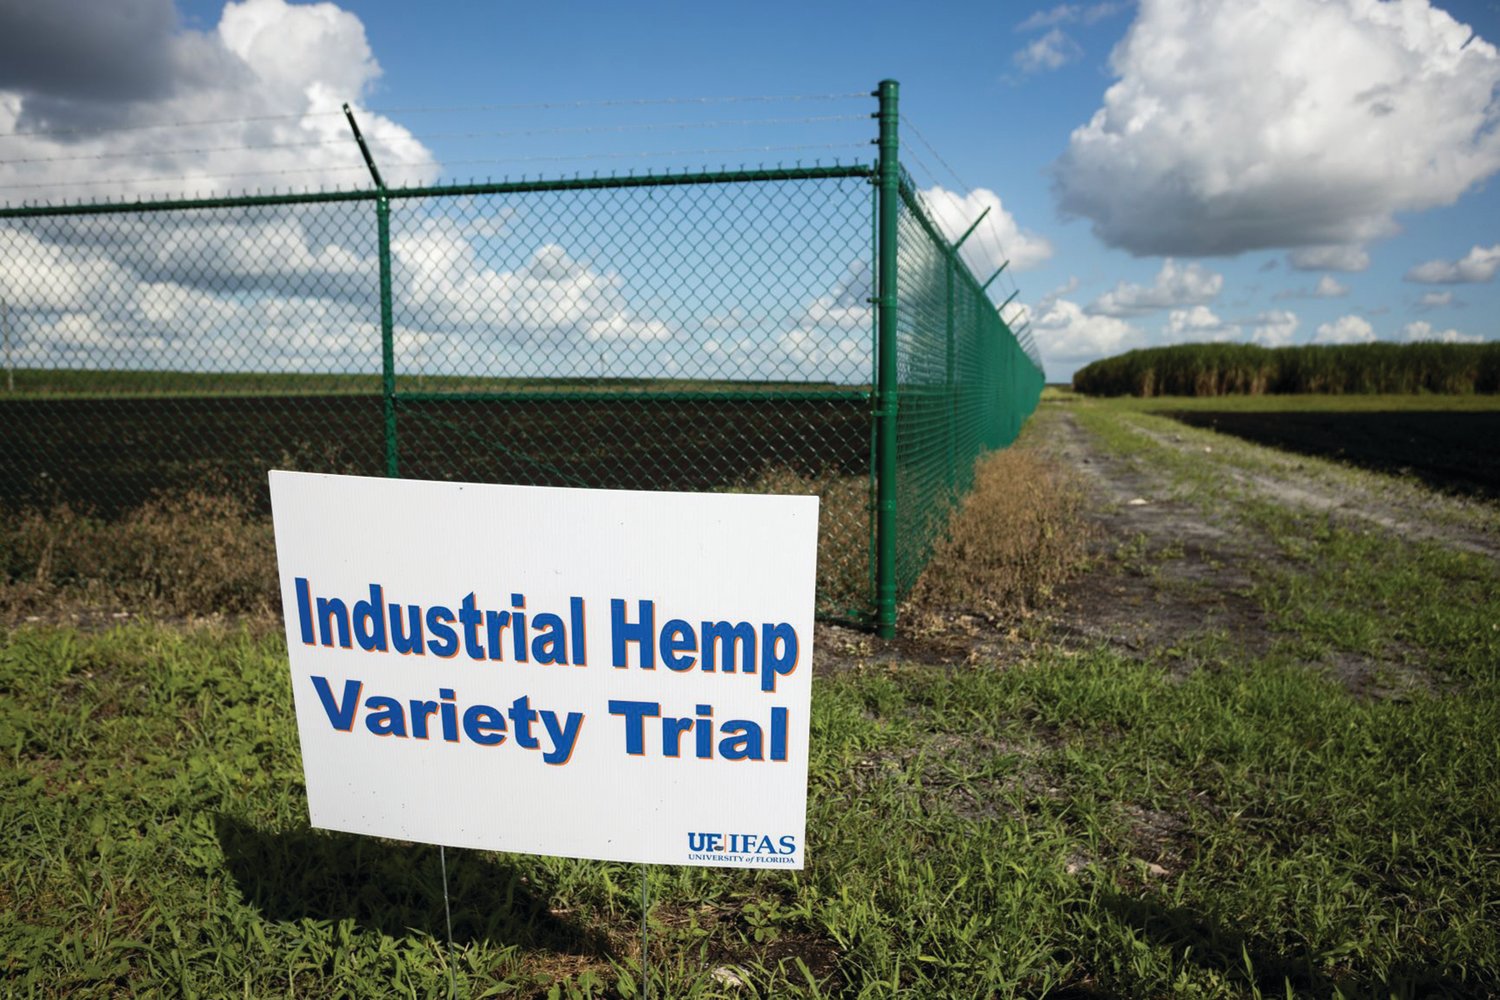 A hemp research trial at the UF/IFAS Everglades Research and Education Center in Belle Glade.